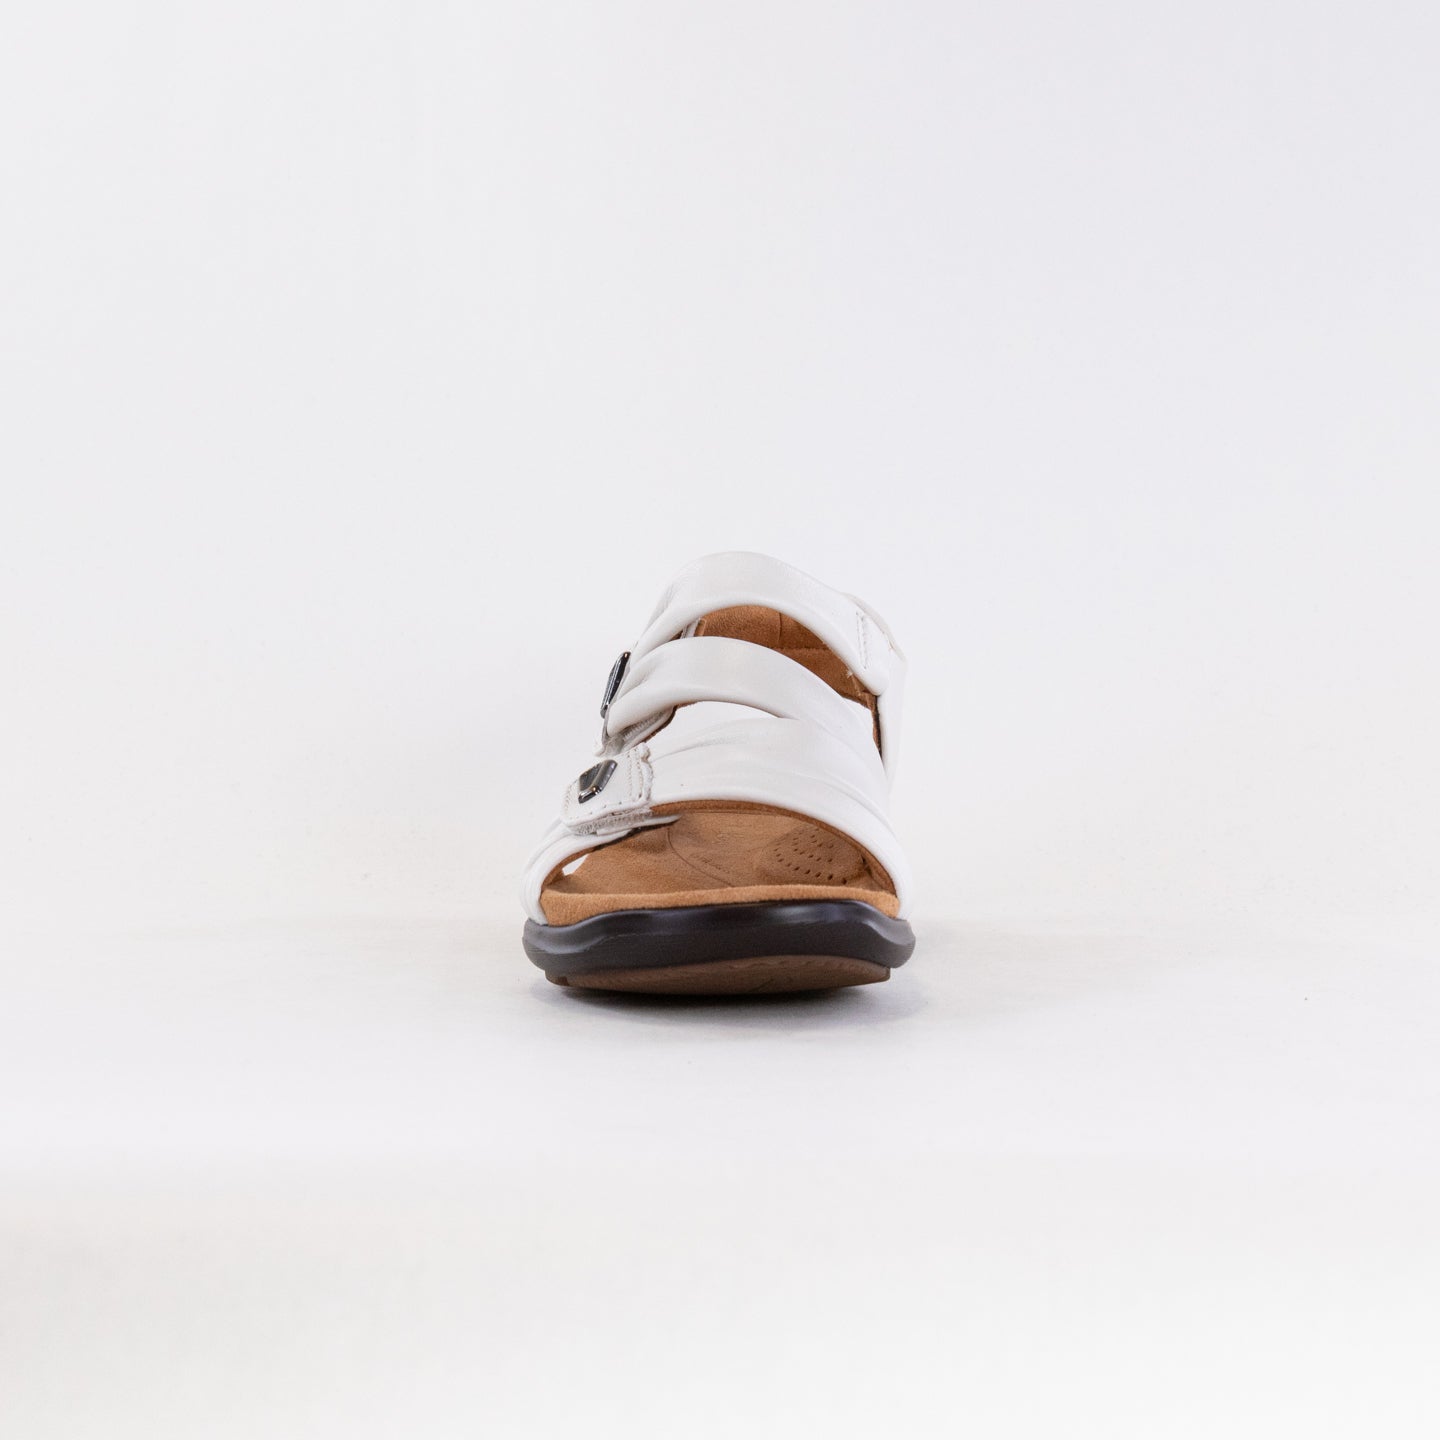 Clarks Kilty Ave (Women's) - Off White Leather